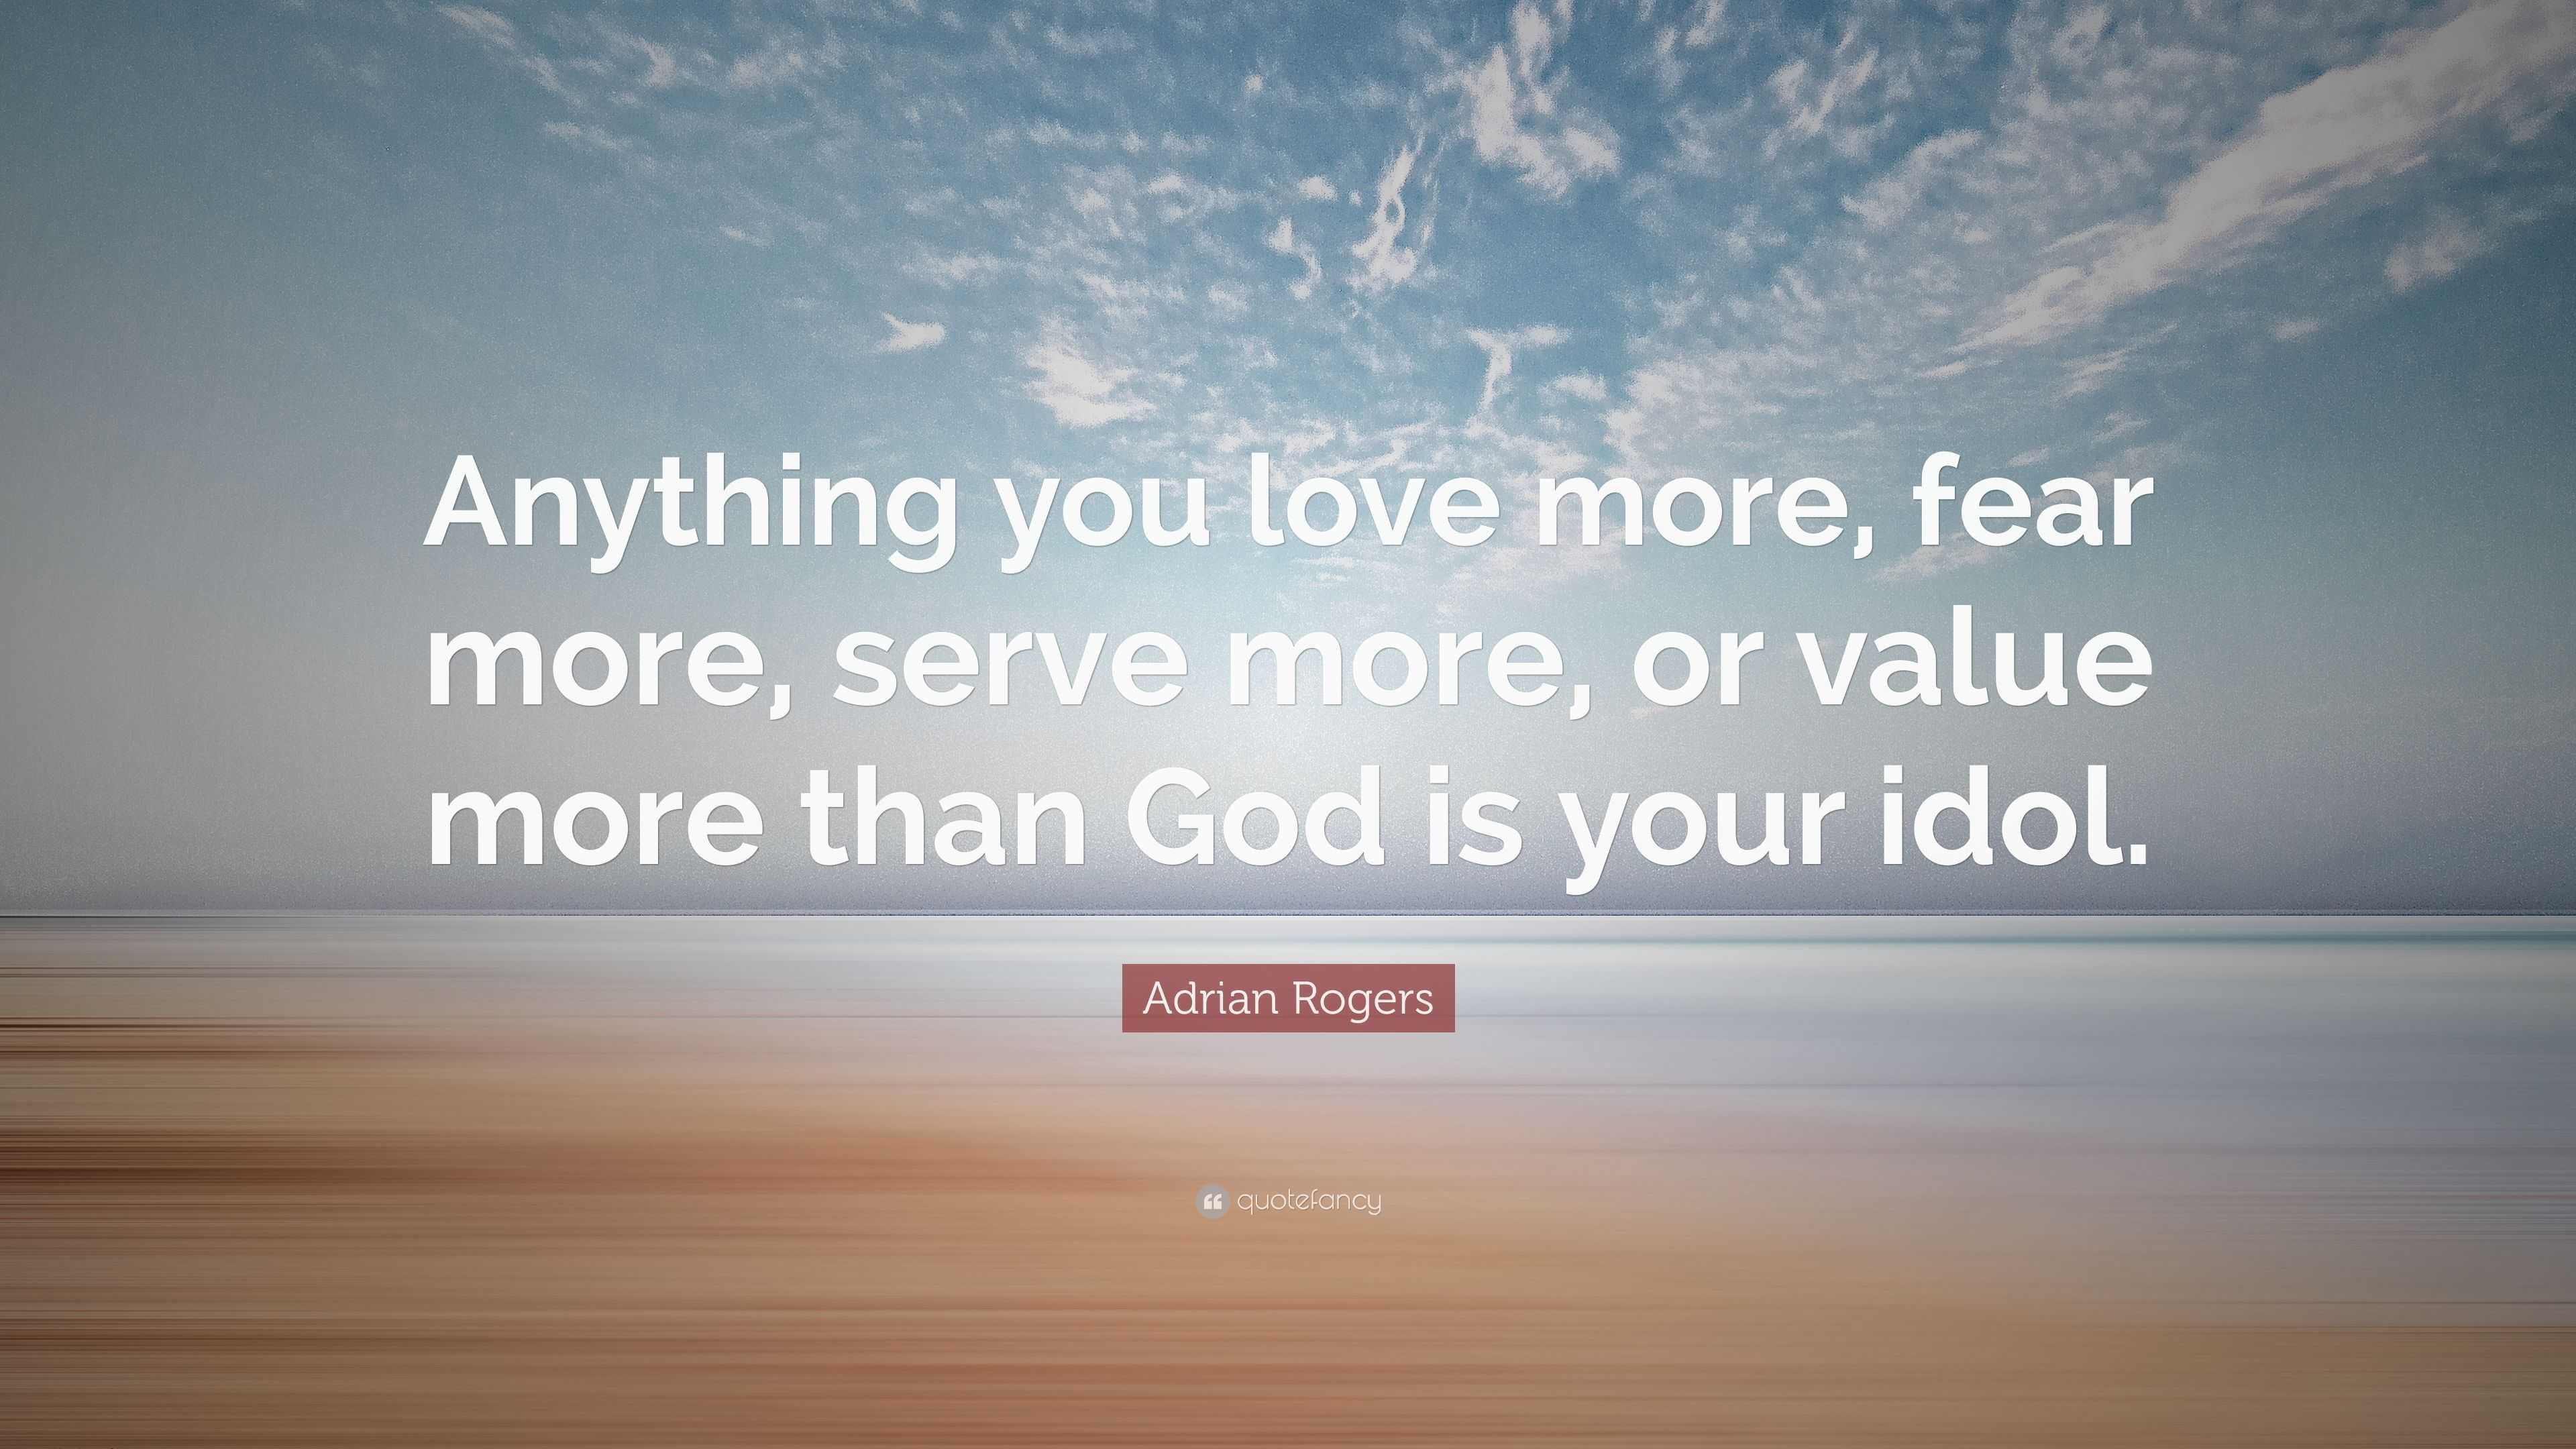 2917125 Adrian Rogers Quote Anything you love more fear more serve more or